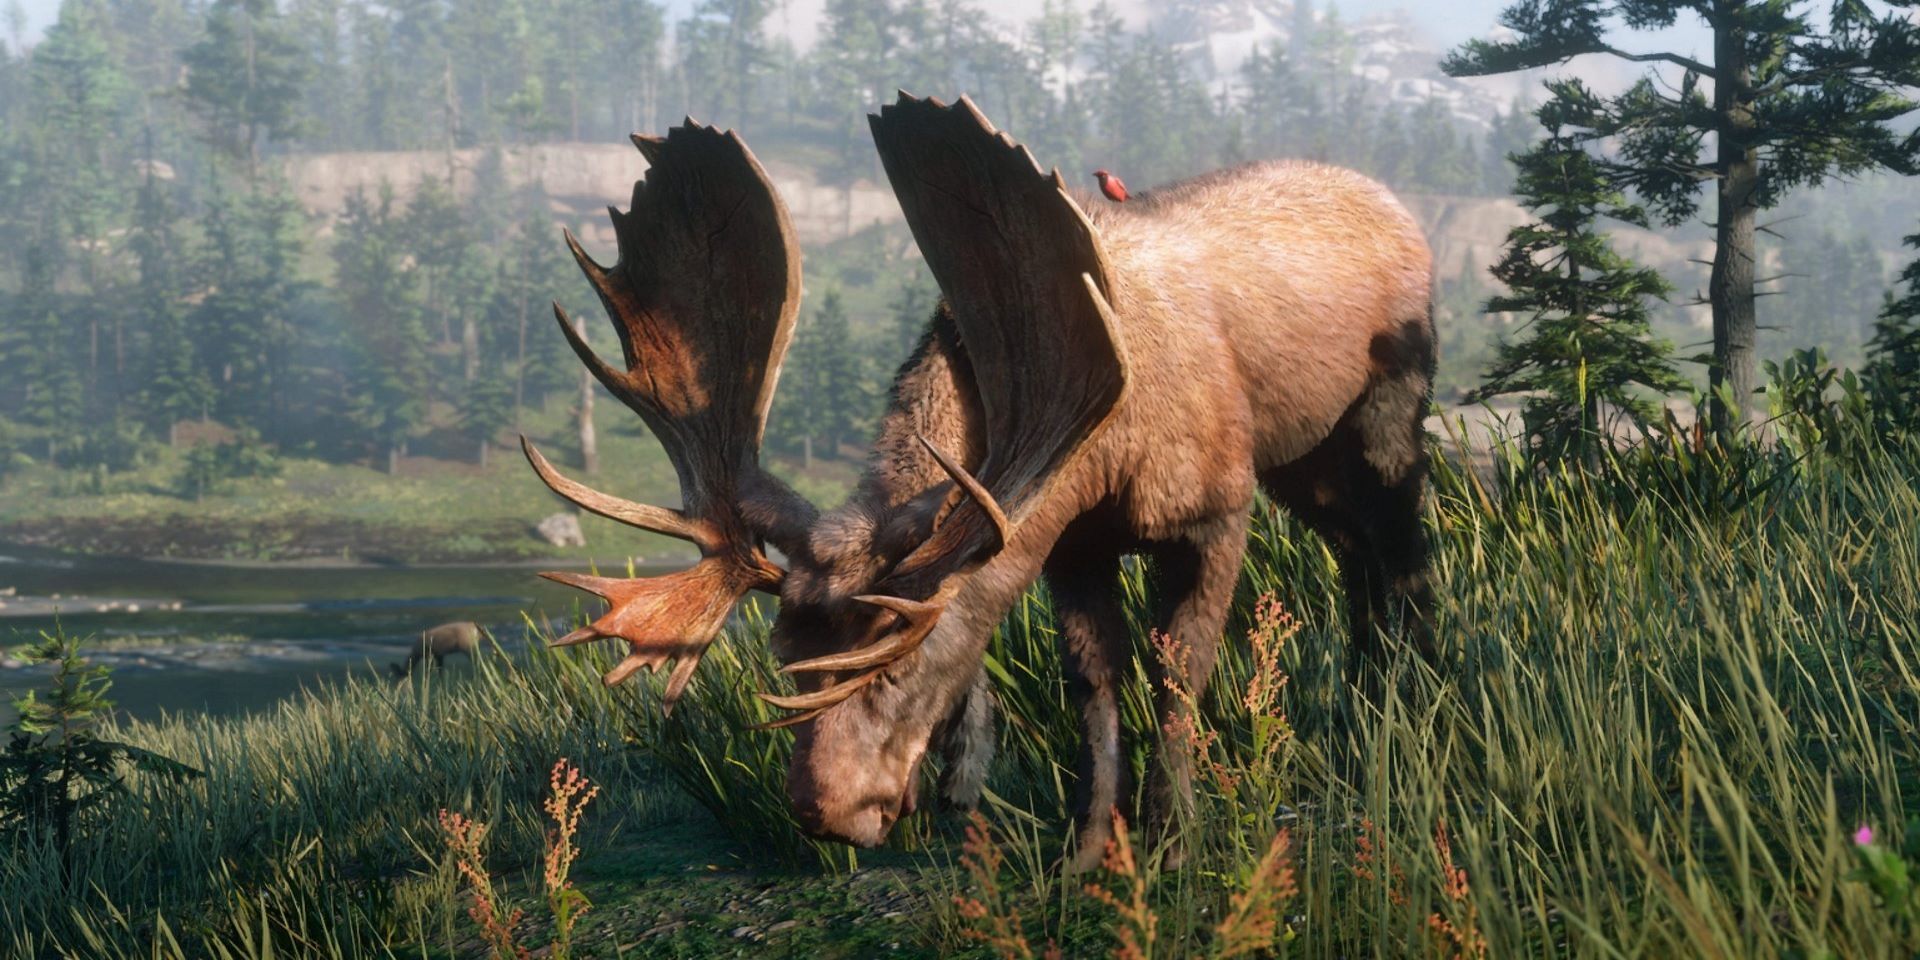 Red Dead Redemption 2 Moose and Songbird in a forest near a river